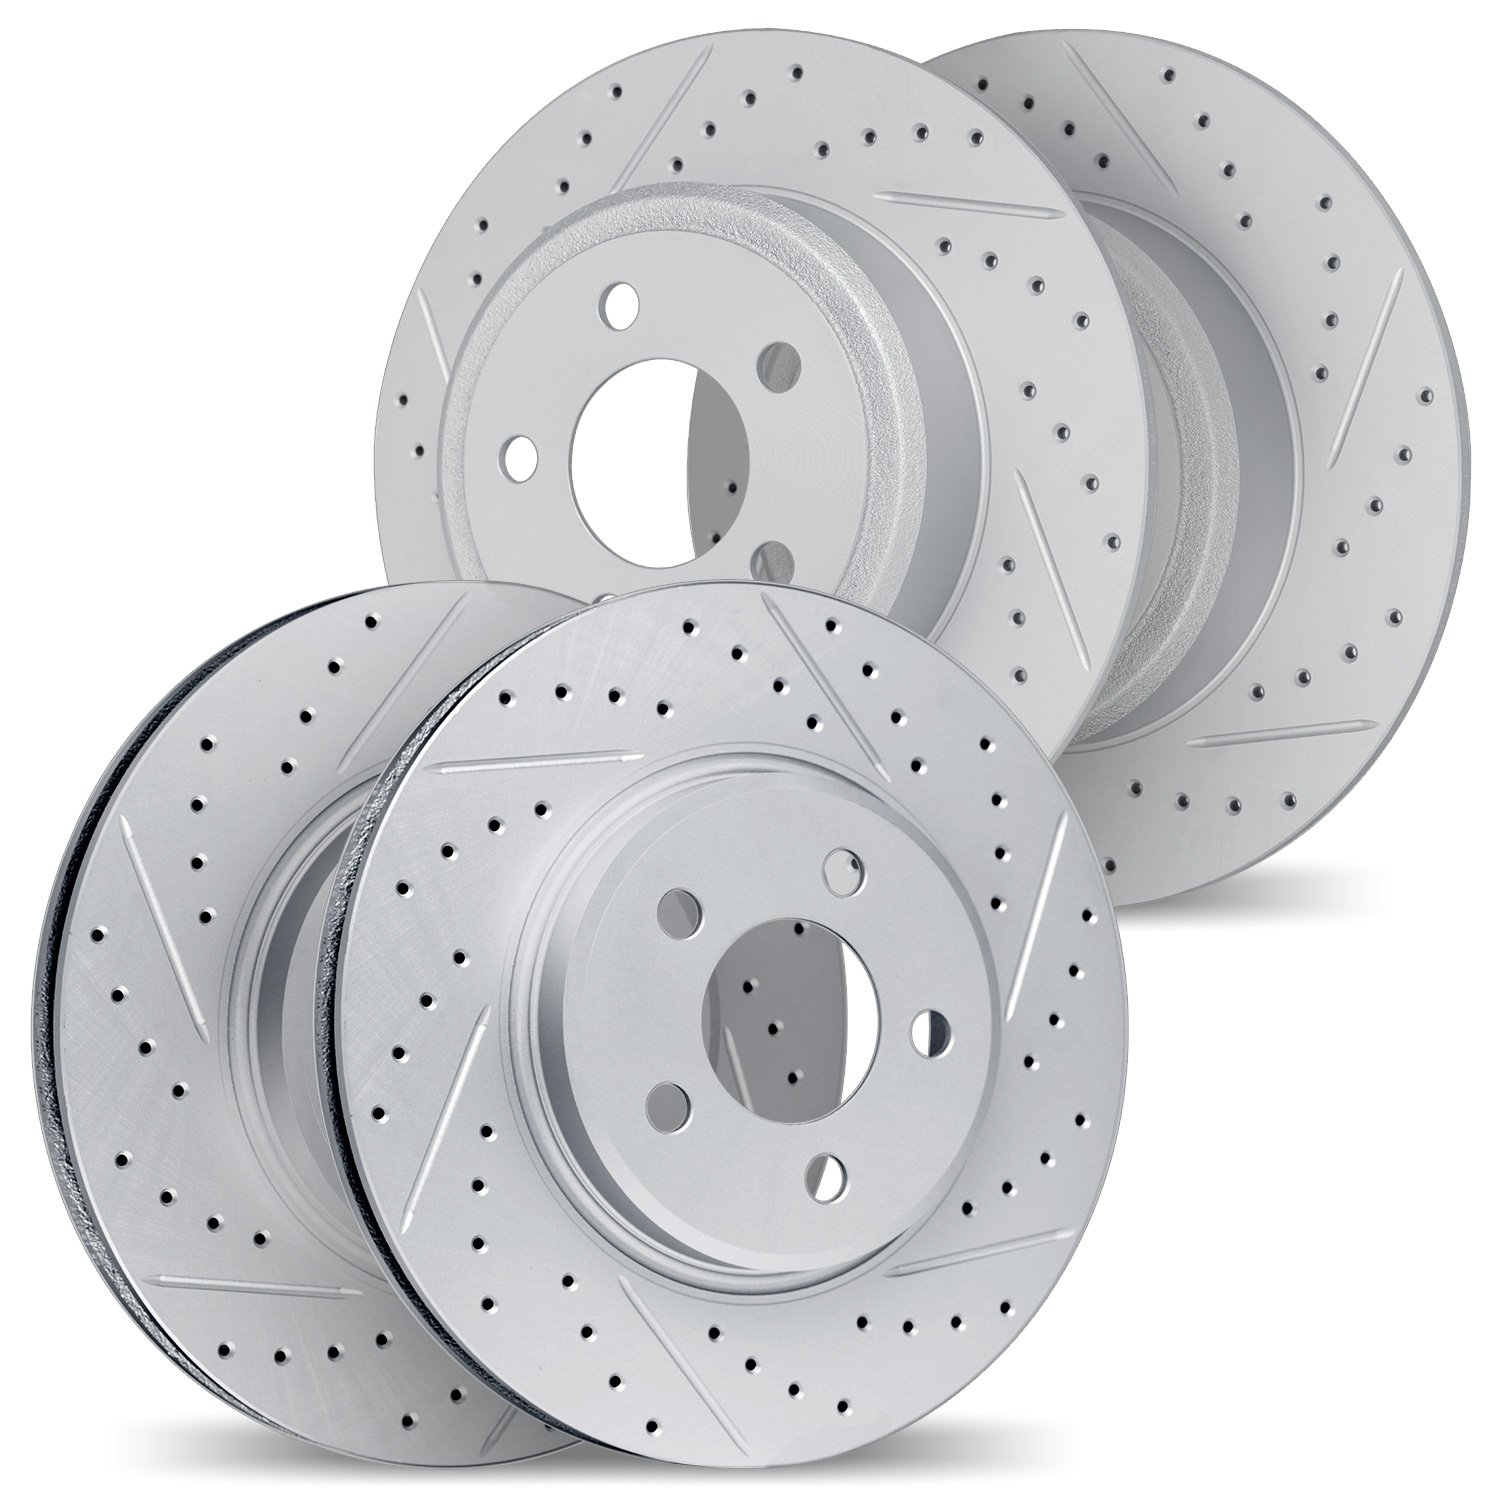 2004-52002 Geoperformance Drilled/Slotted Brake Rotors, 2000-2005 GM, Position: Front and Rear